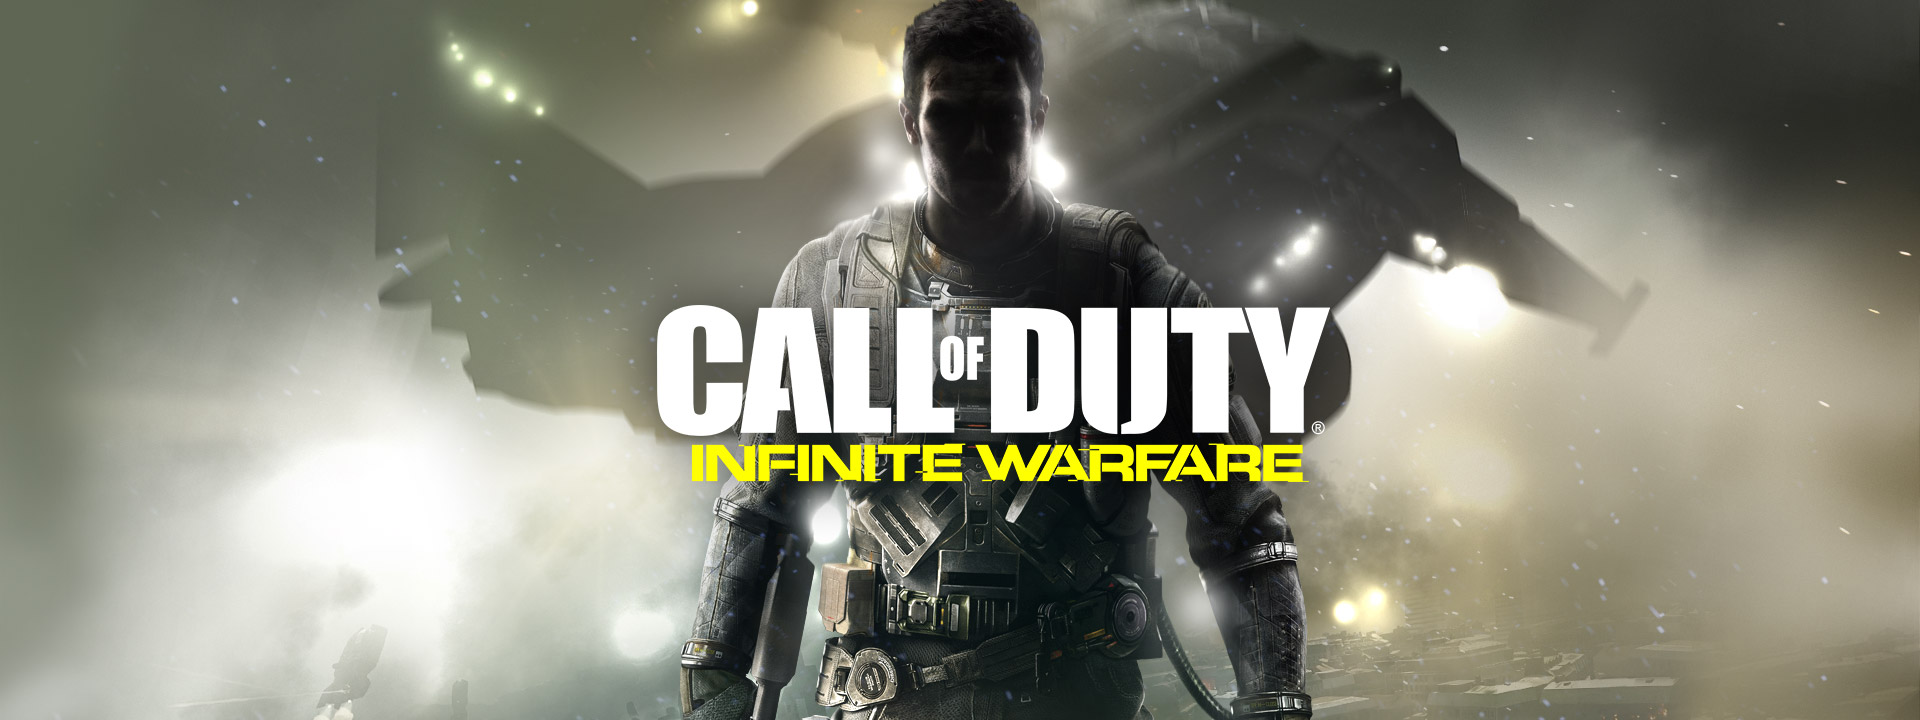 call of duty infinite warfare wallpaper,action adventure game,movie,action film,fictional character,font